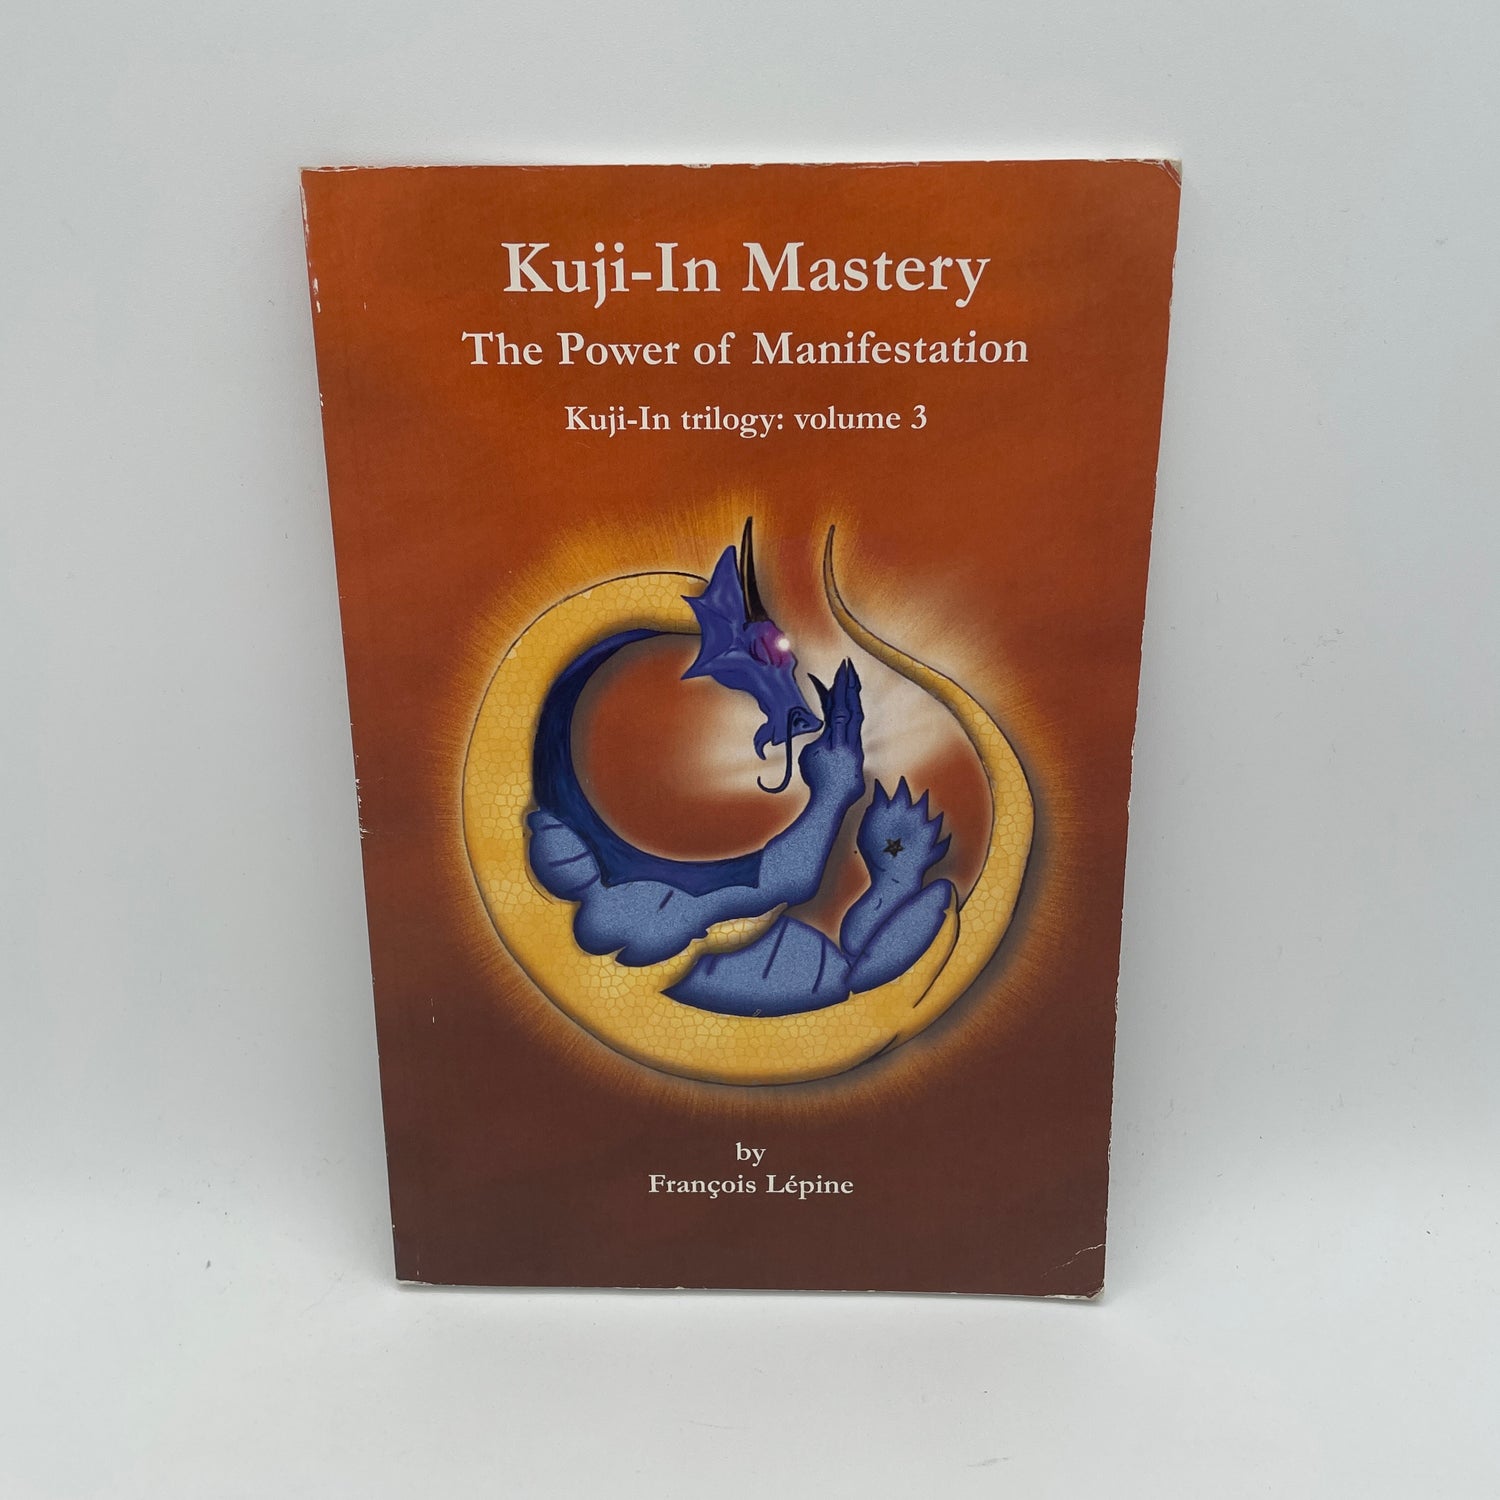 Kuji-in Trilogy Book 3 Kuji-In Mastery The Power of Manifestation by Francois Lepine (Preowned)